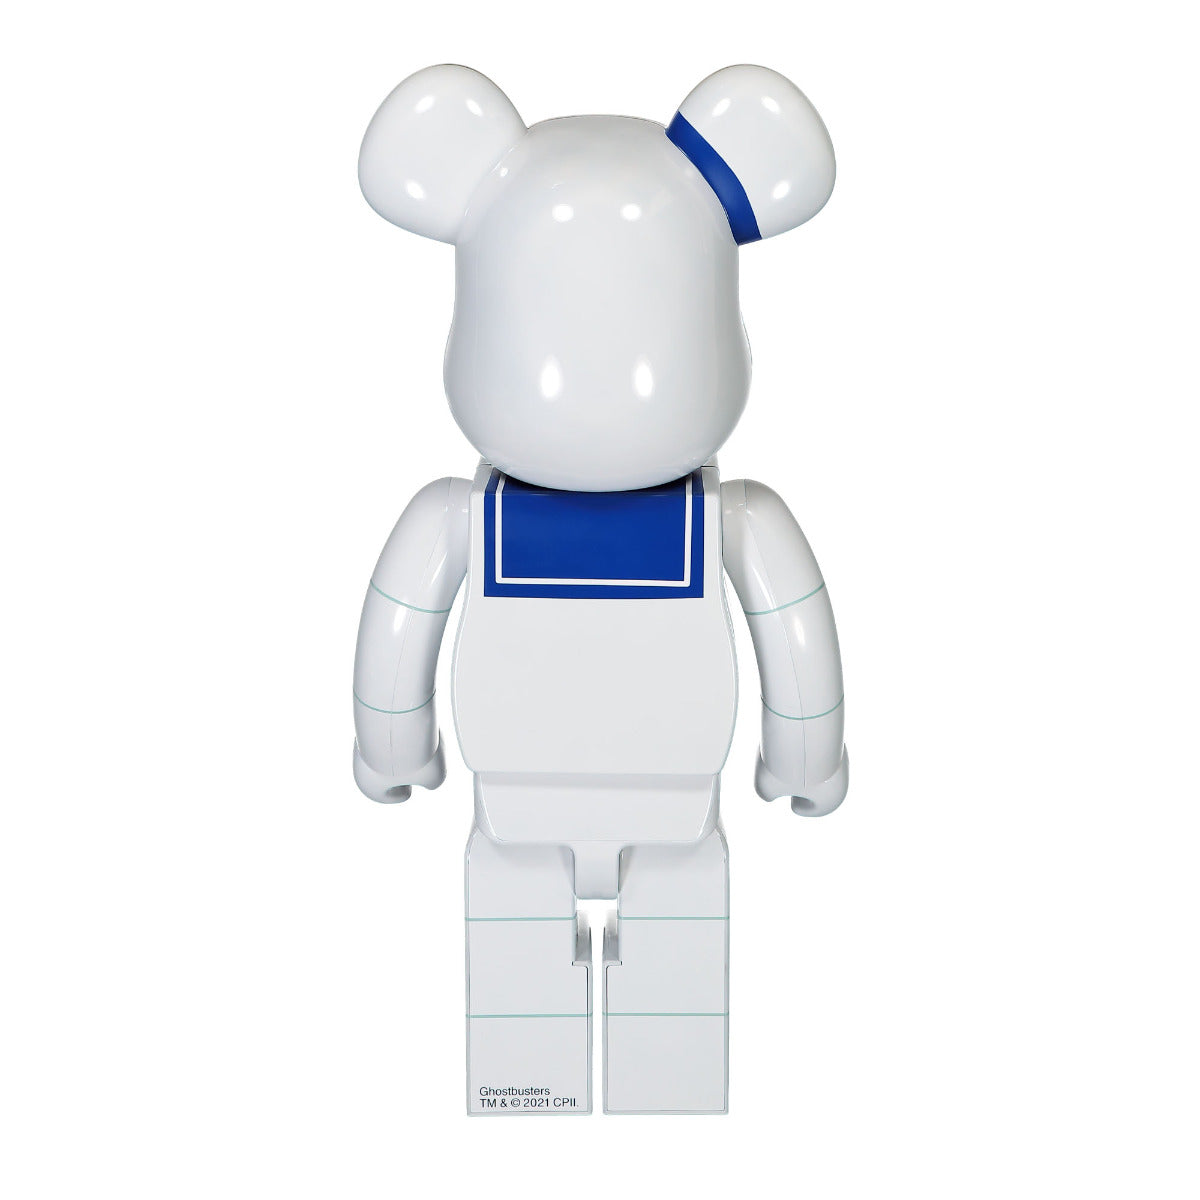 Be@rbrick Stay Puft Marshmallow Man White Chrome Version 1000% | GATE